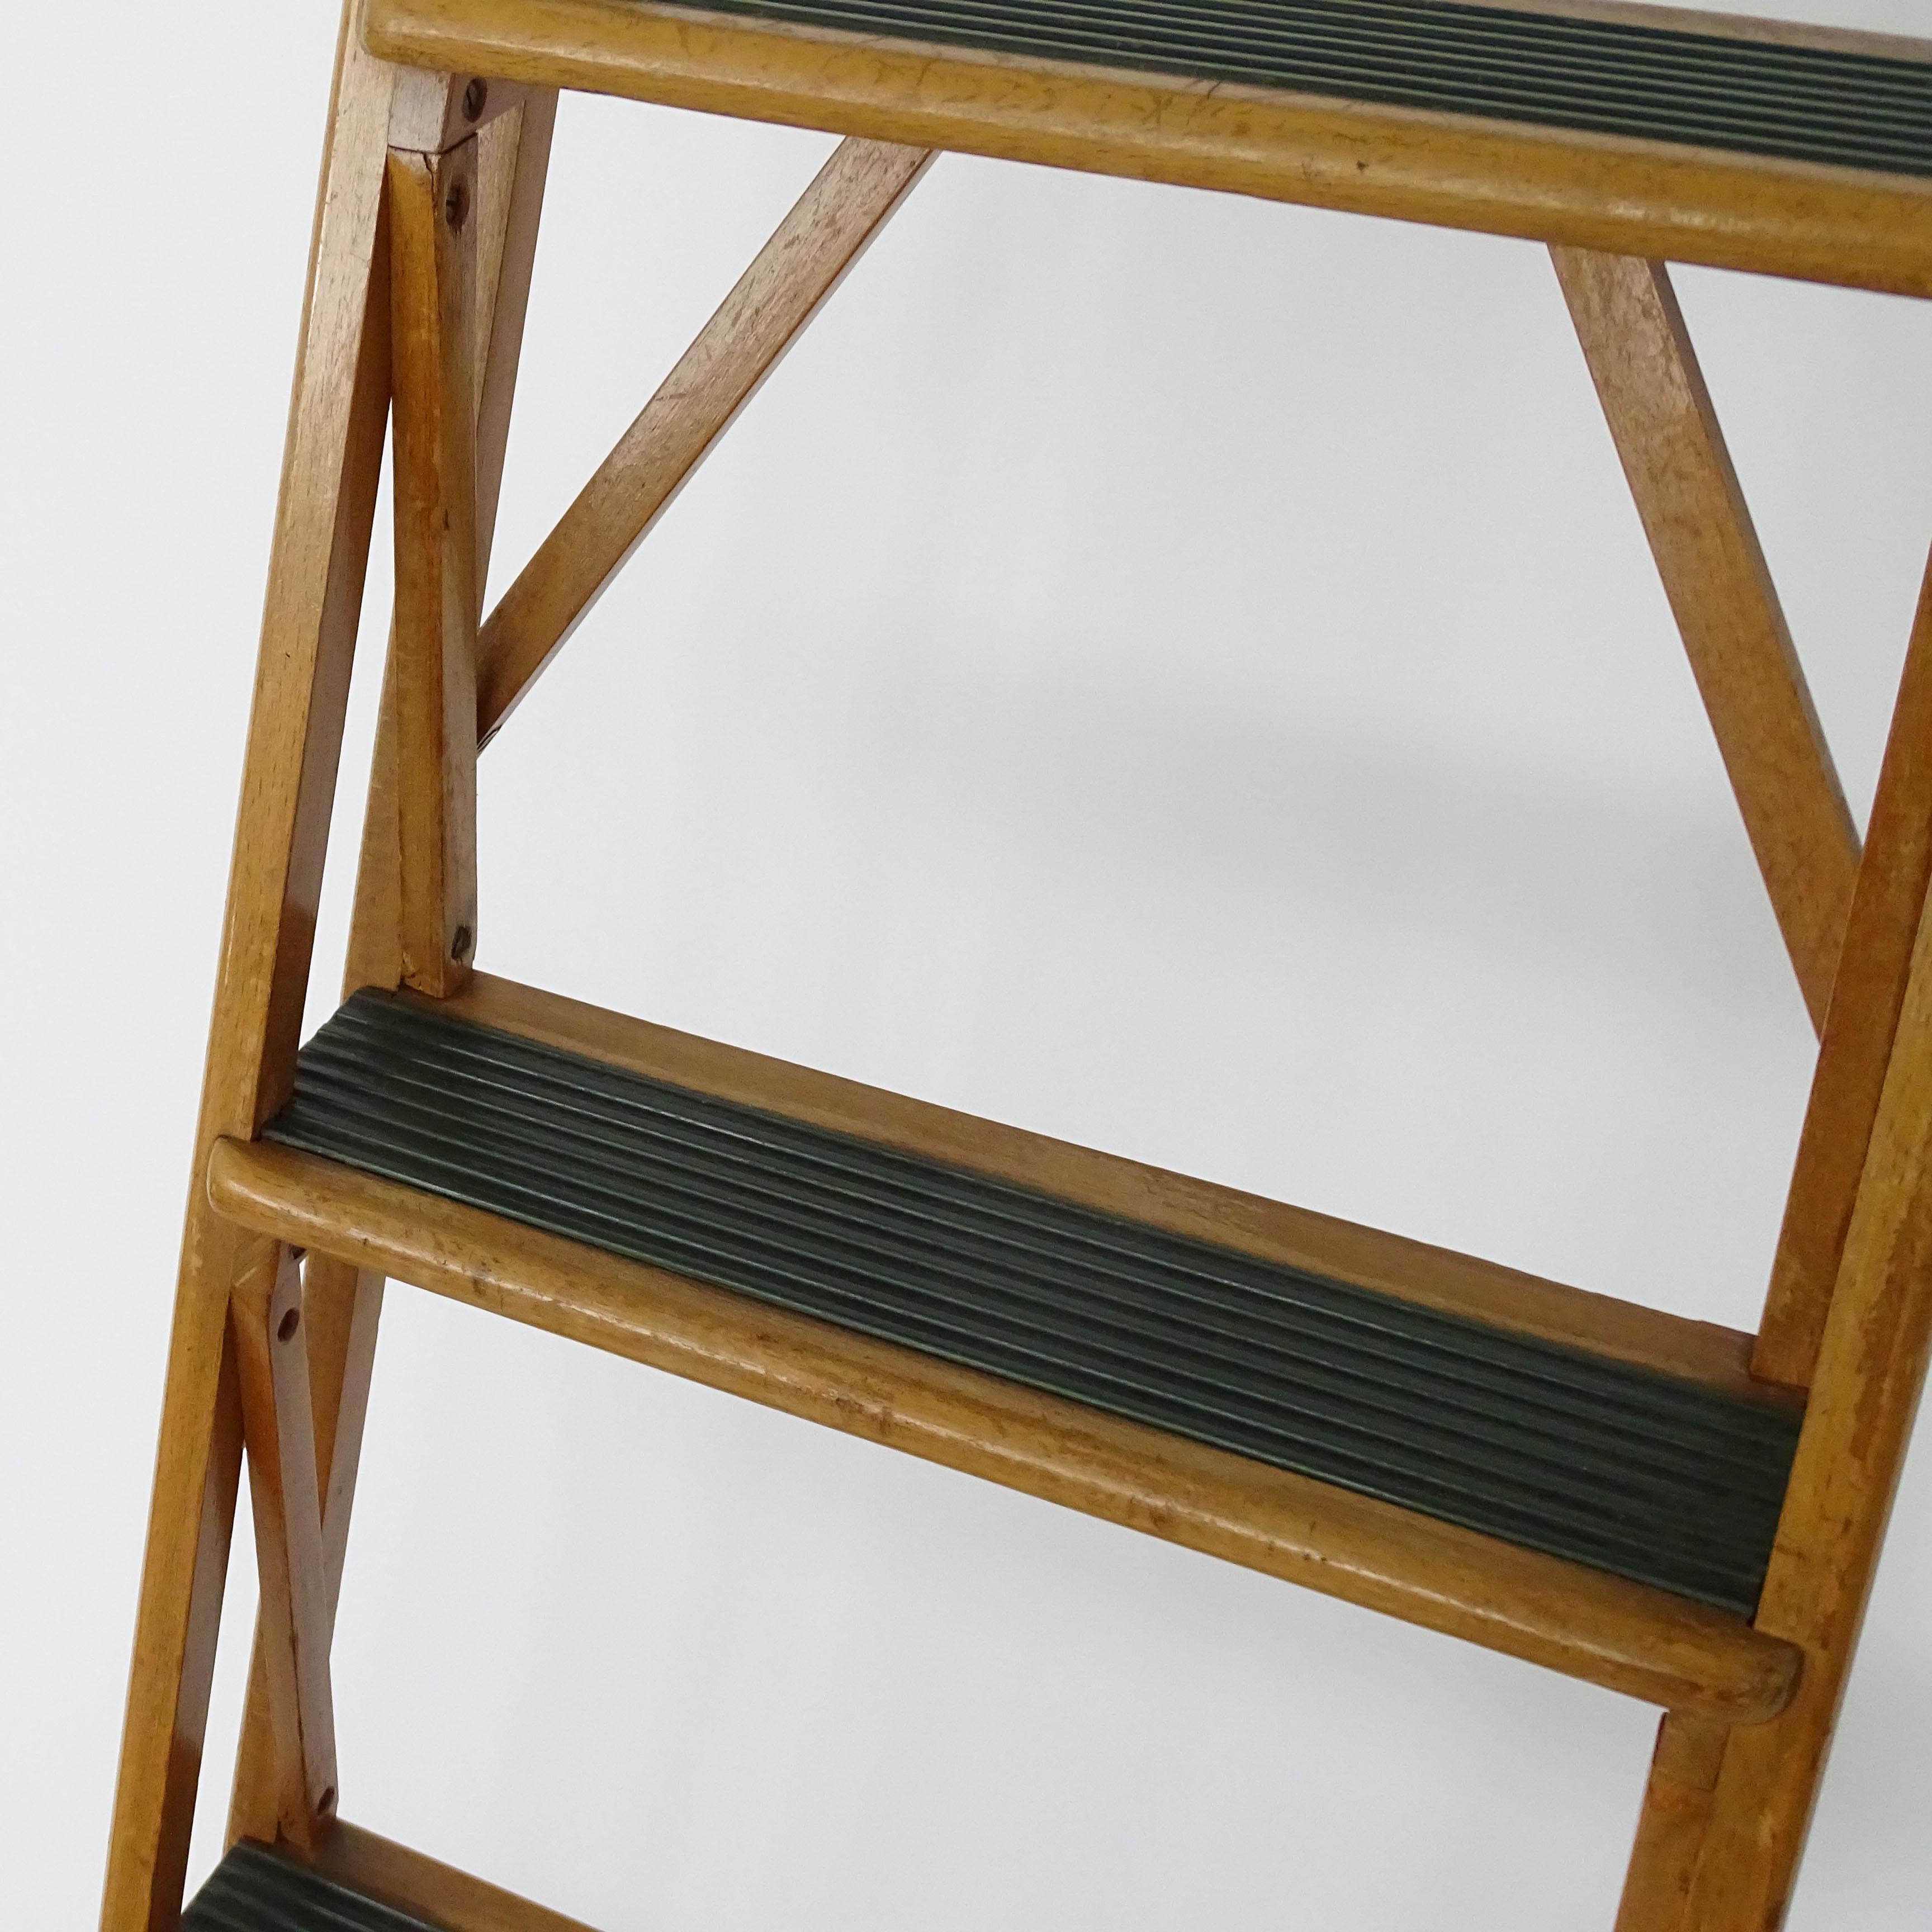 Mid-20th Century Italian Architectural Library Ladder Attributed to Franco Albini, 1950s